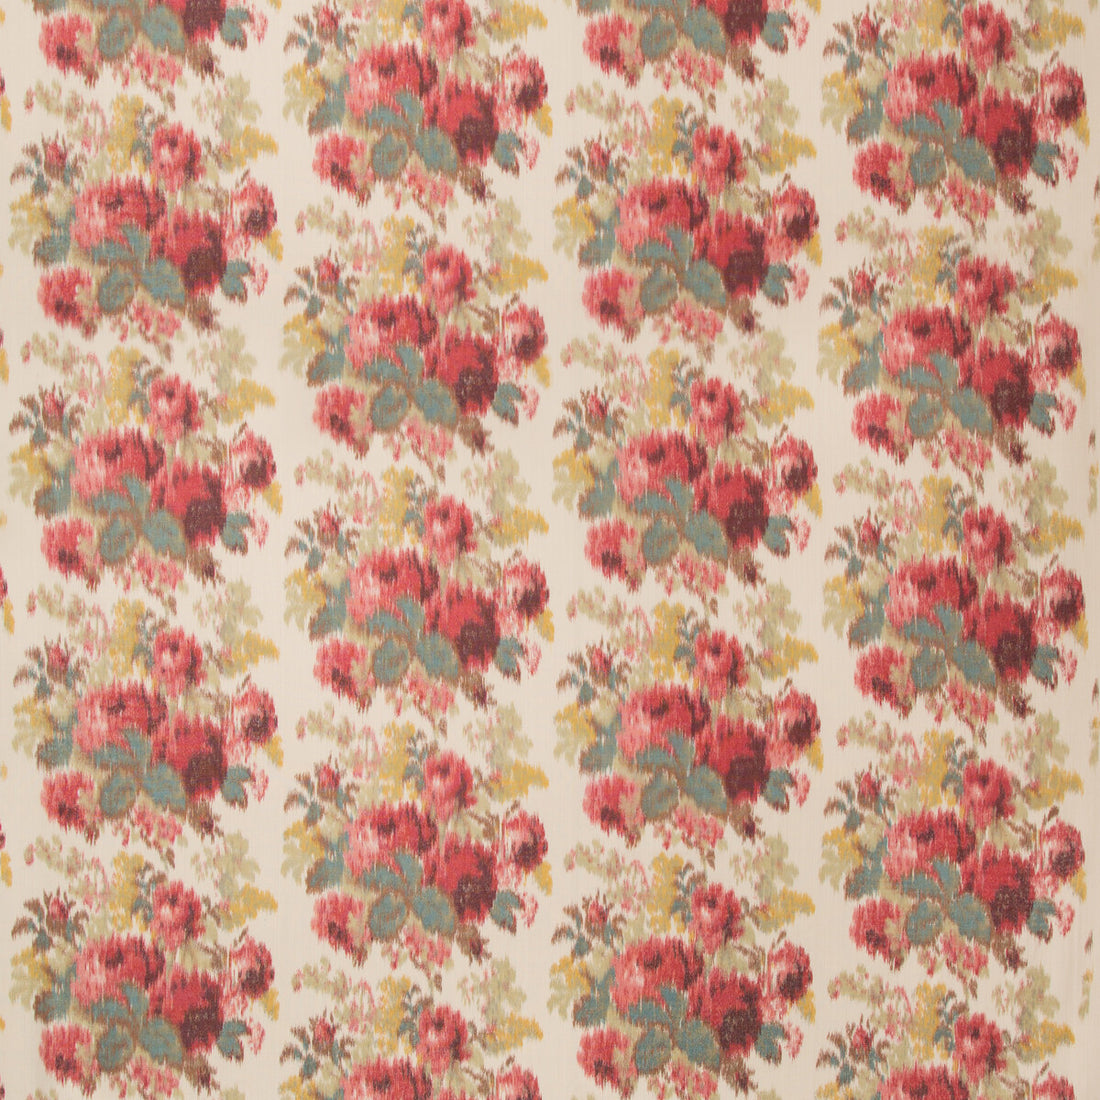 Alderley Print fabric in rose color - pattern 2019108.174.0 - by Lee Jofa in the Manor House collection